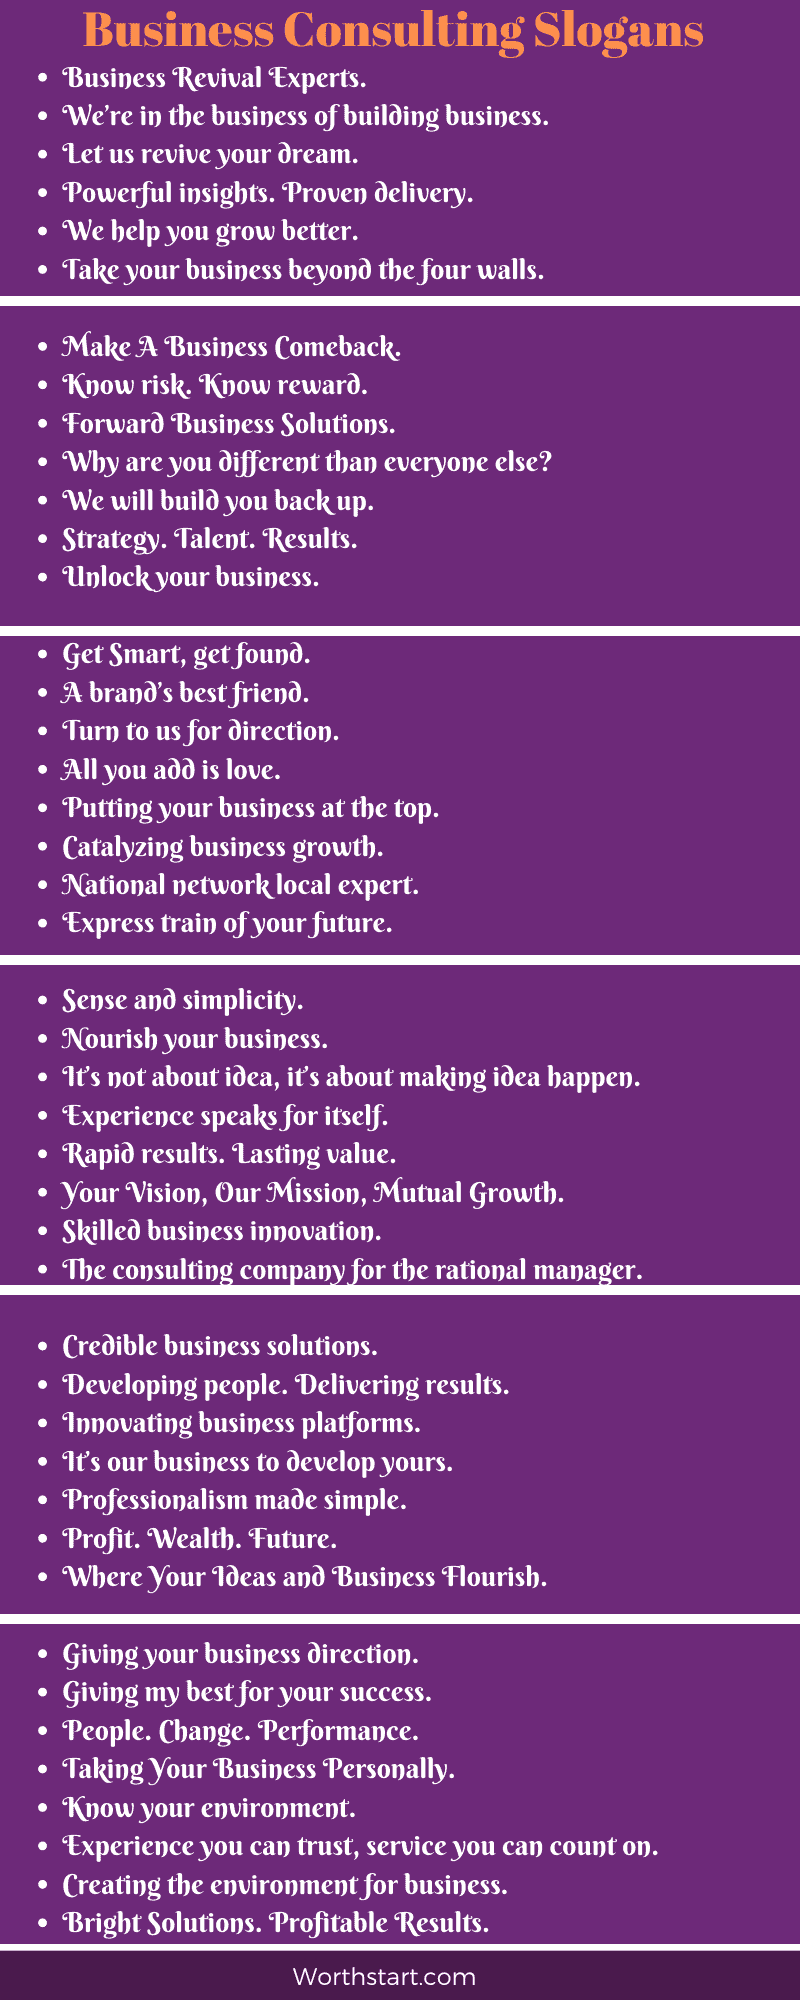 Business Consulting Slogans